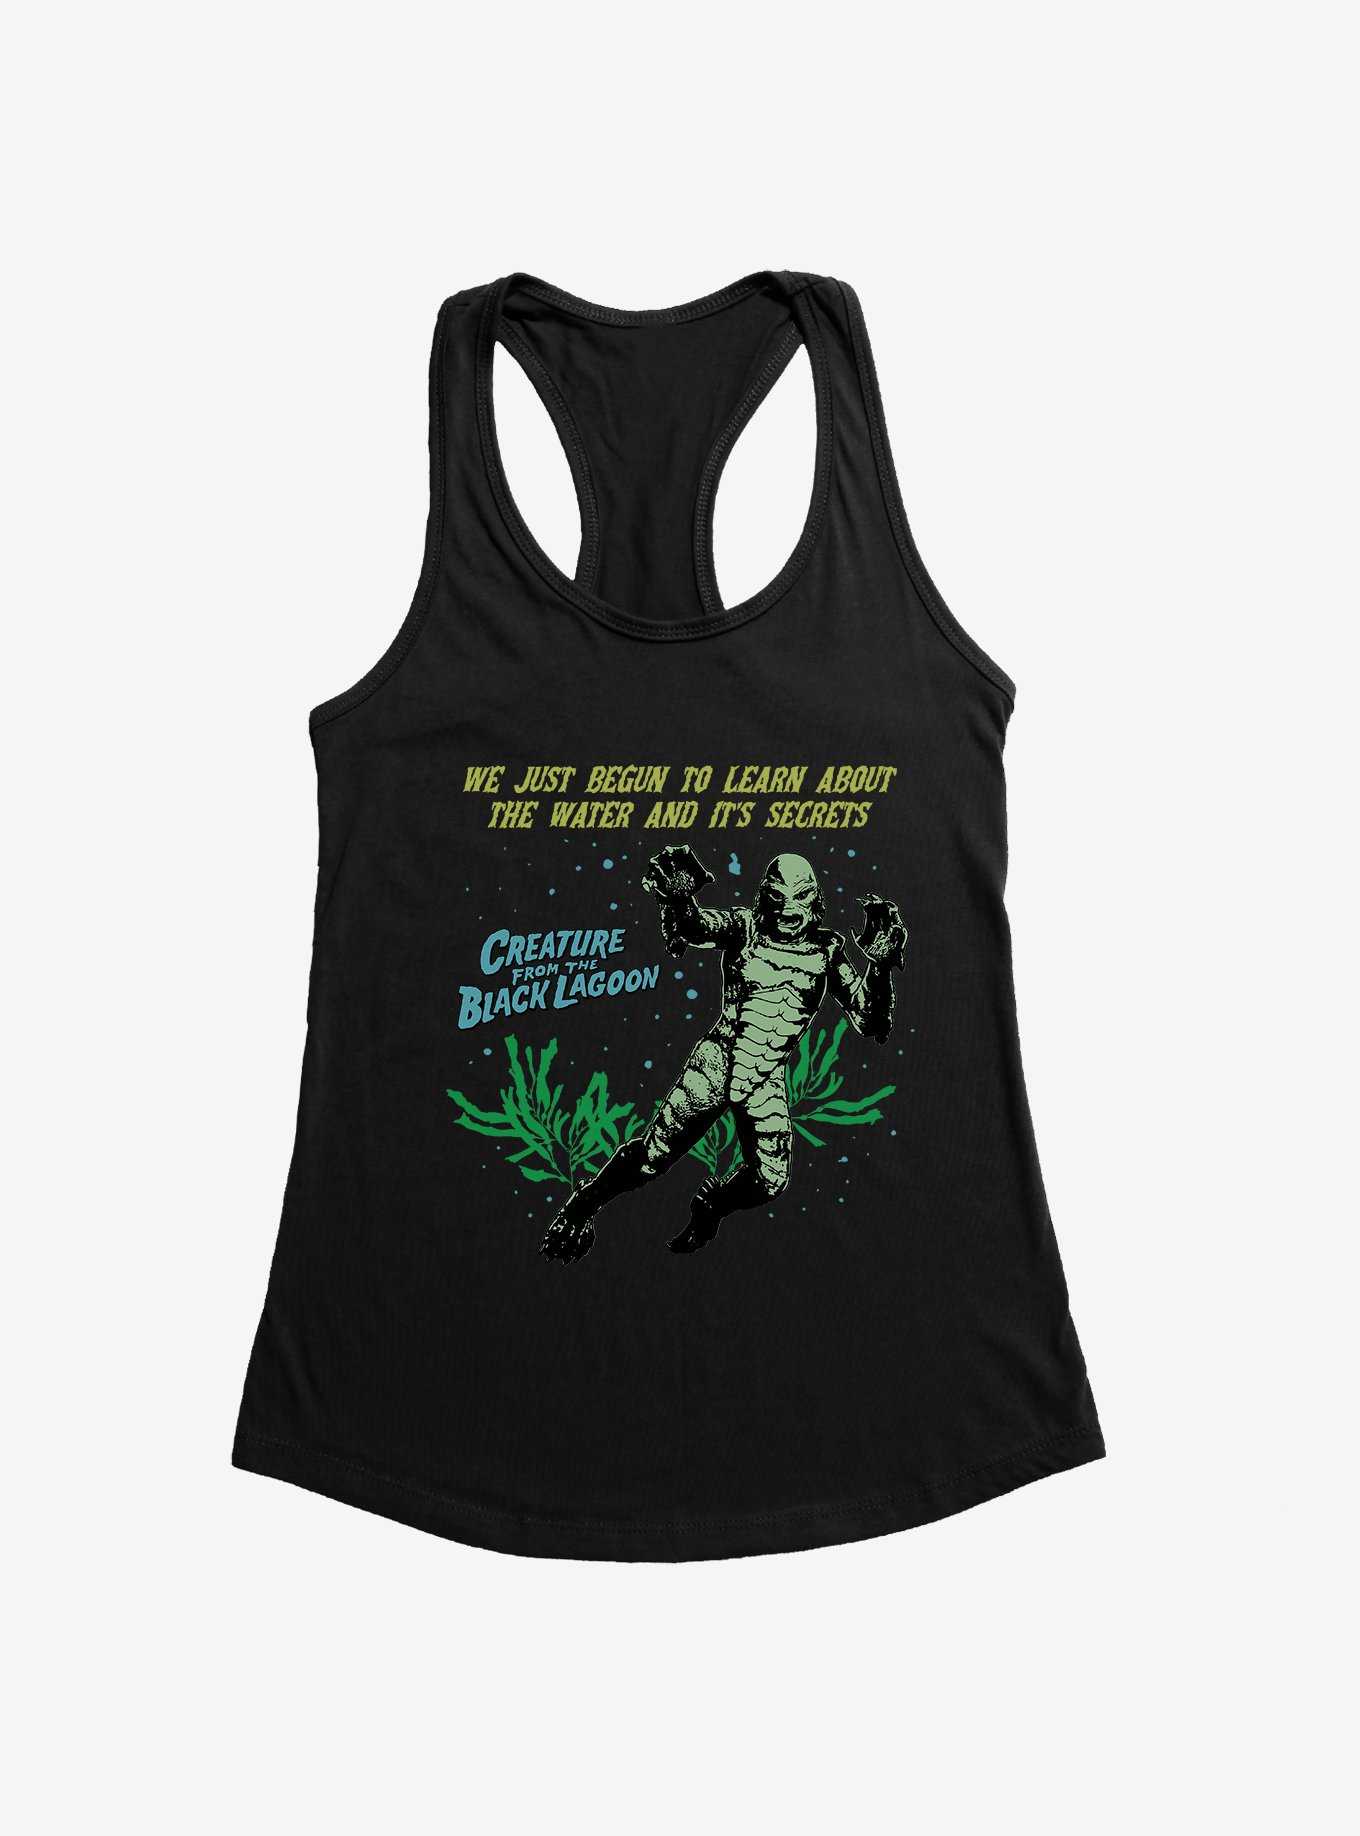 Creature From The Black Lagoon Water And It's Secrets Womens Tank Top, , hi-res